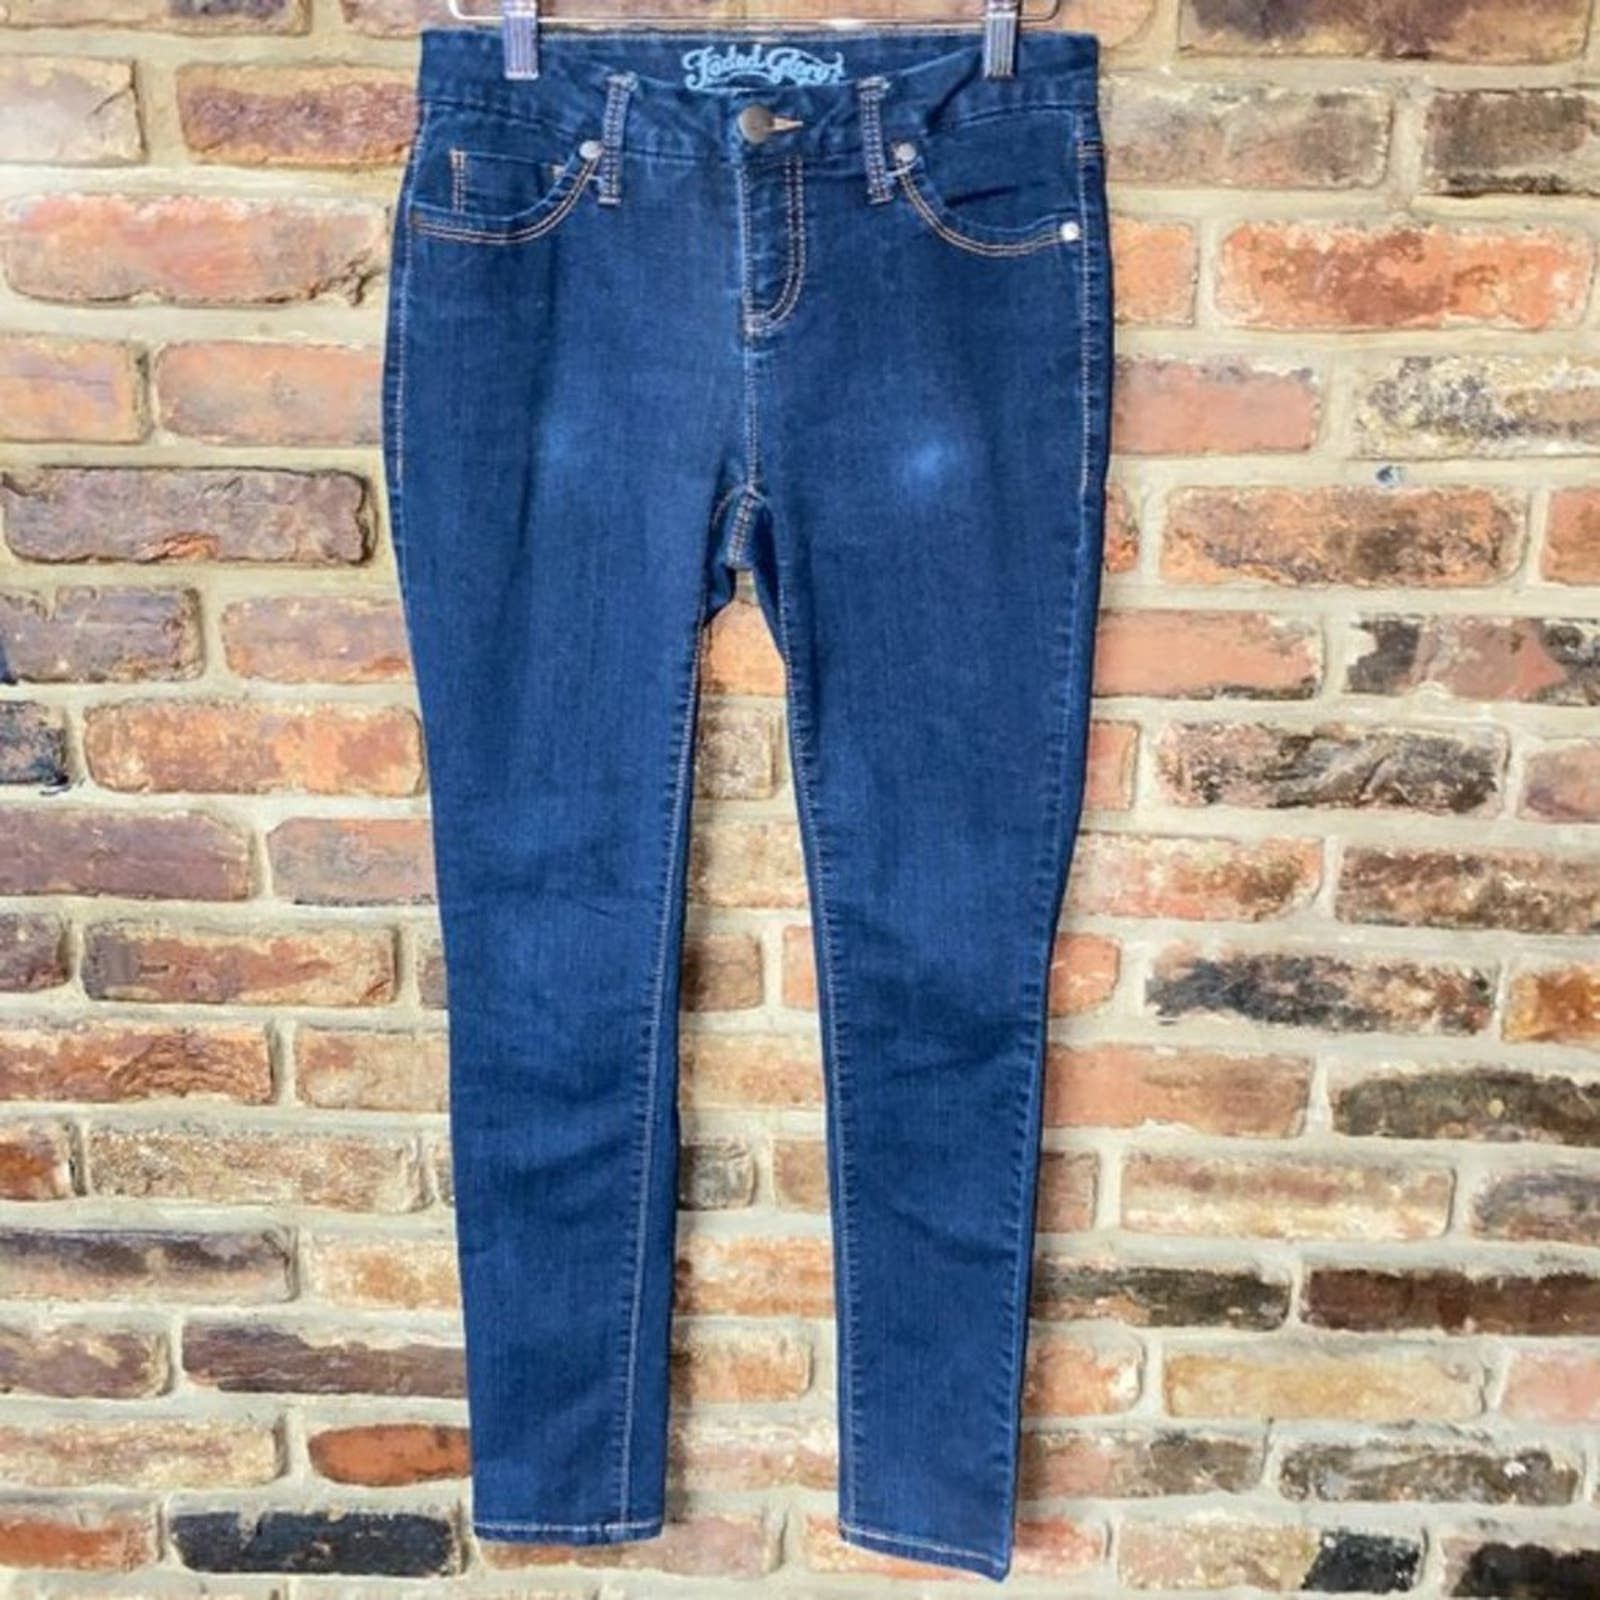 Faded Glory Women's Denim Jeggings available in Regular and Petite